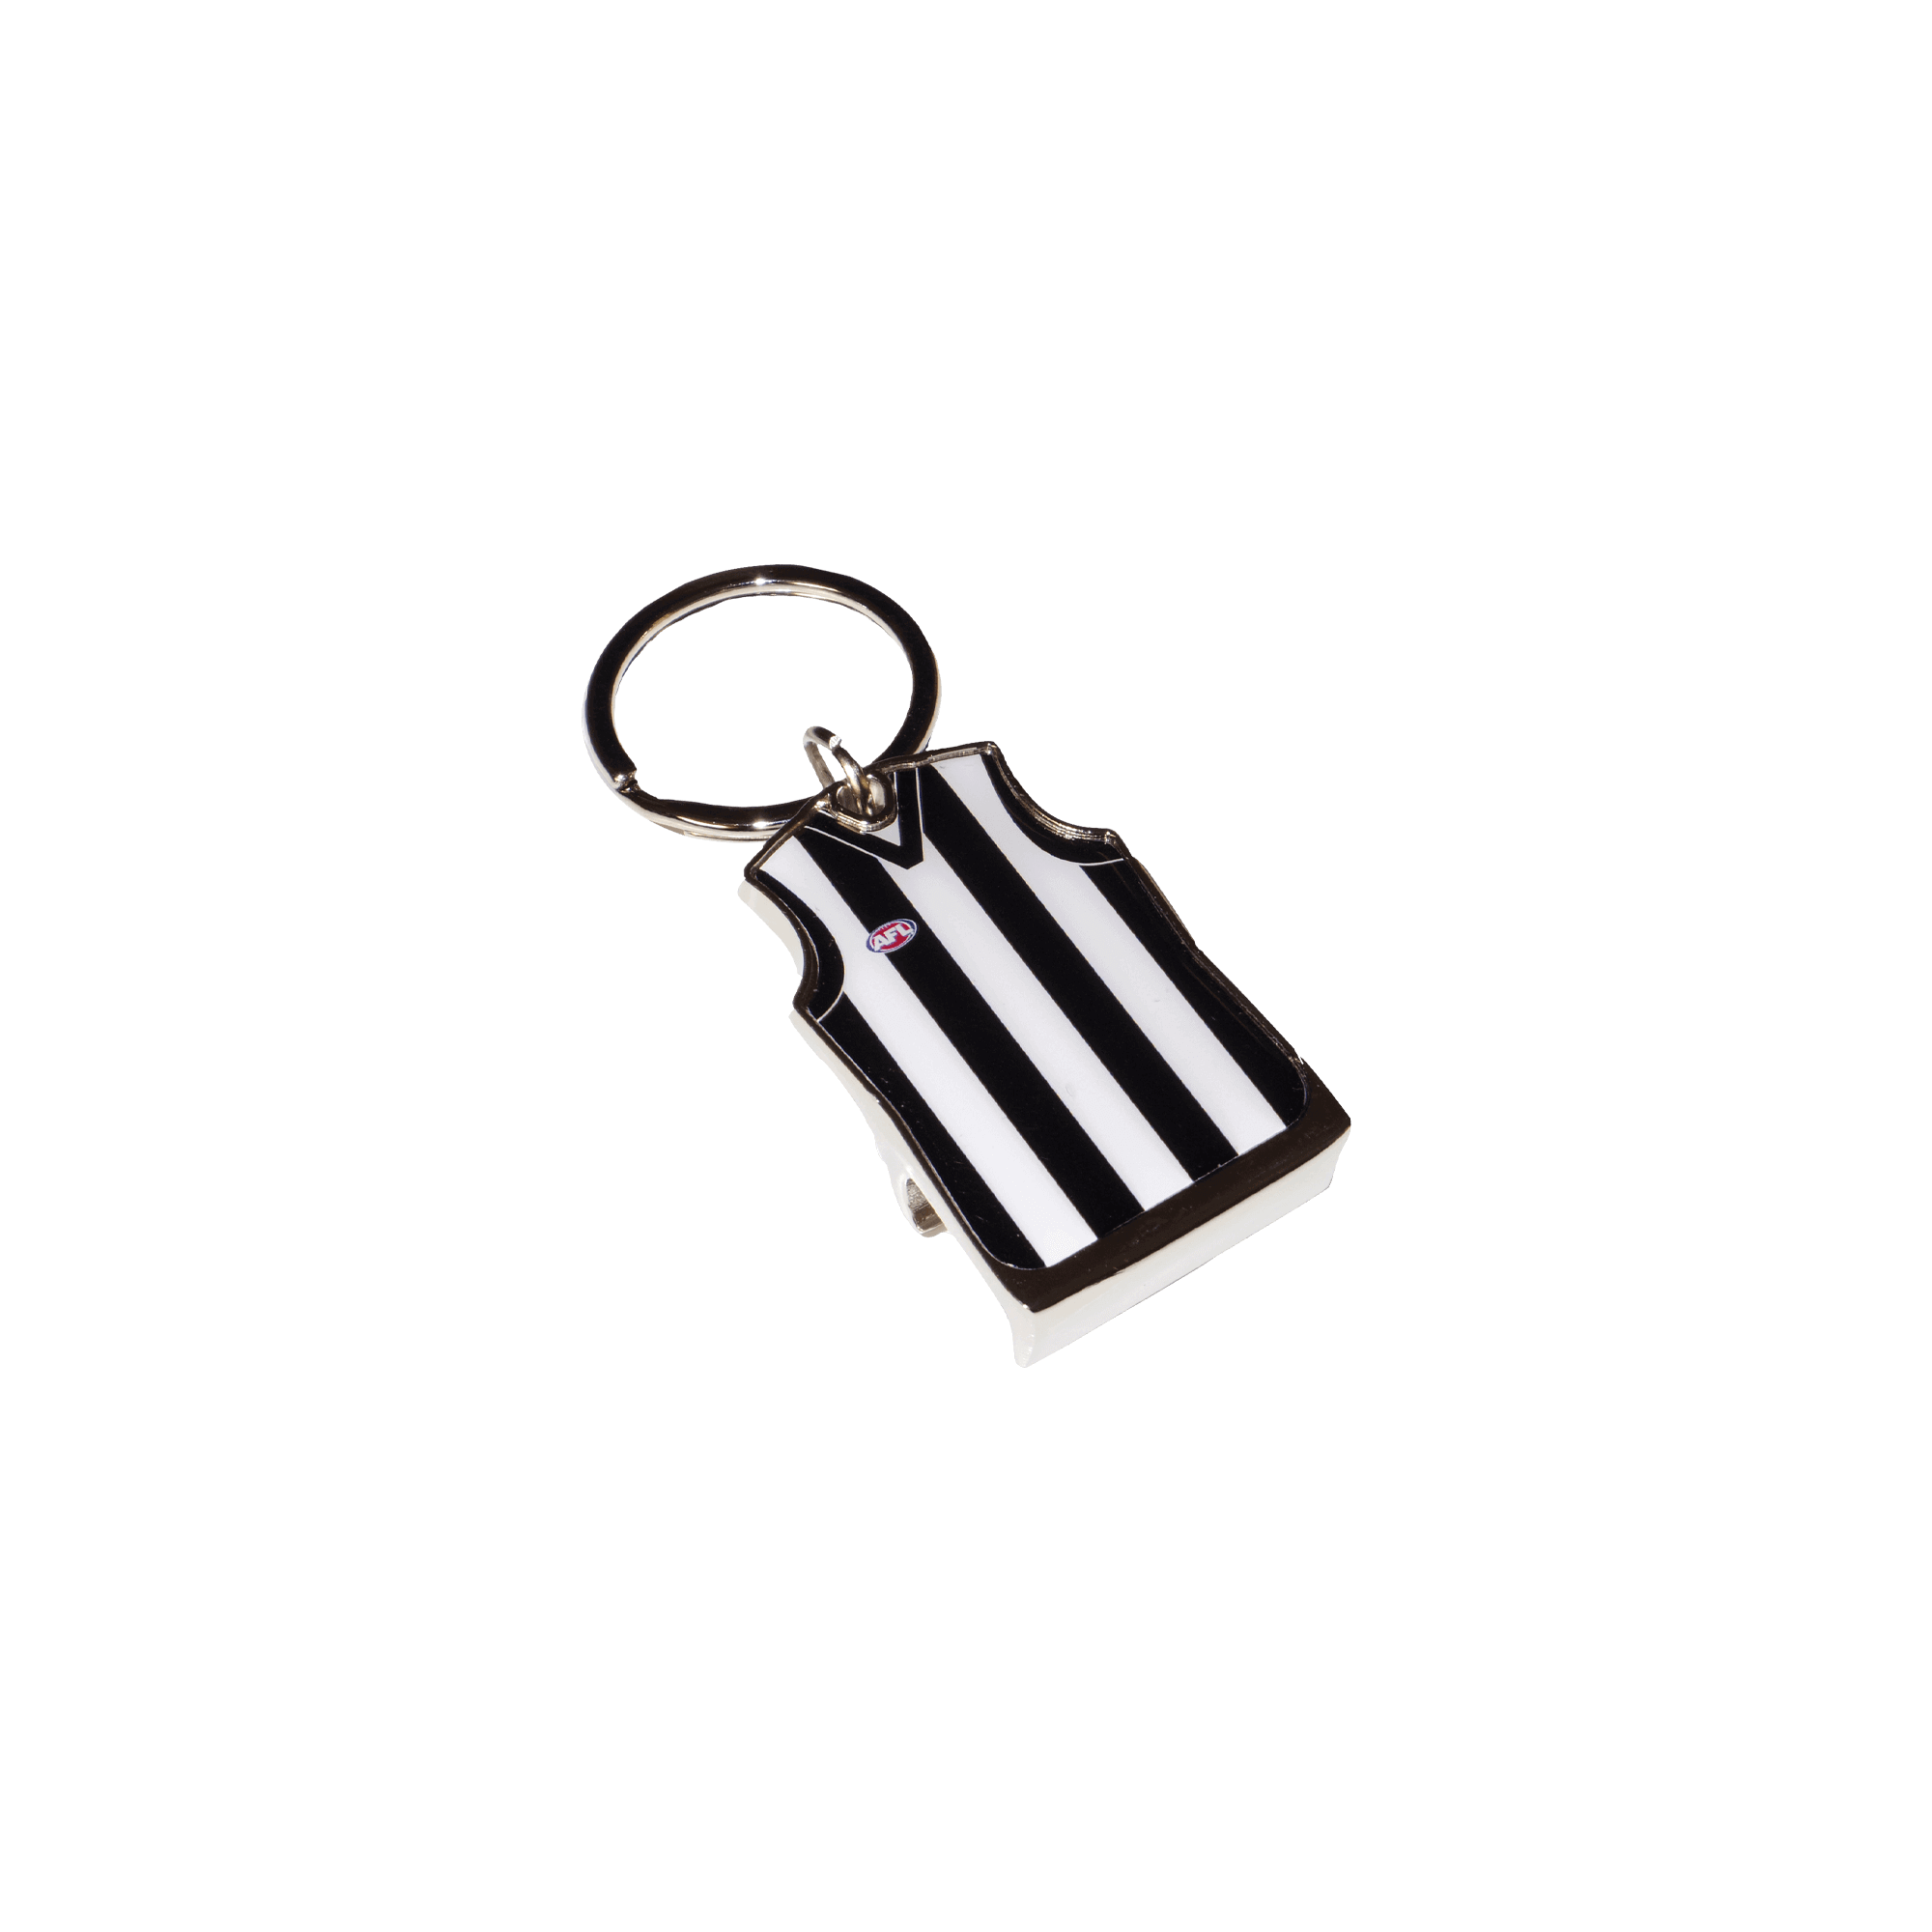 COLLINGWOOD MAGPIES AFL TEAM GUERNSEY BOTTLE OPENER KEYRING_COLLINGWOOD MAGPIES_STUBBY CLUB